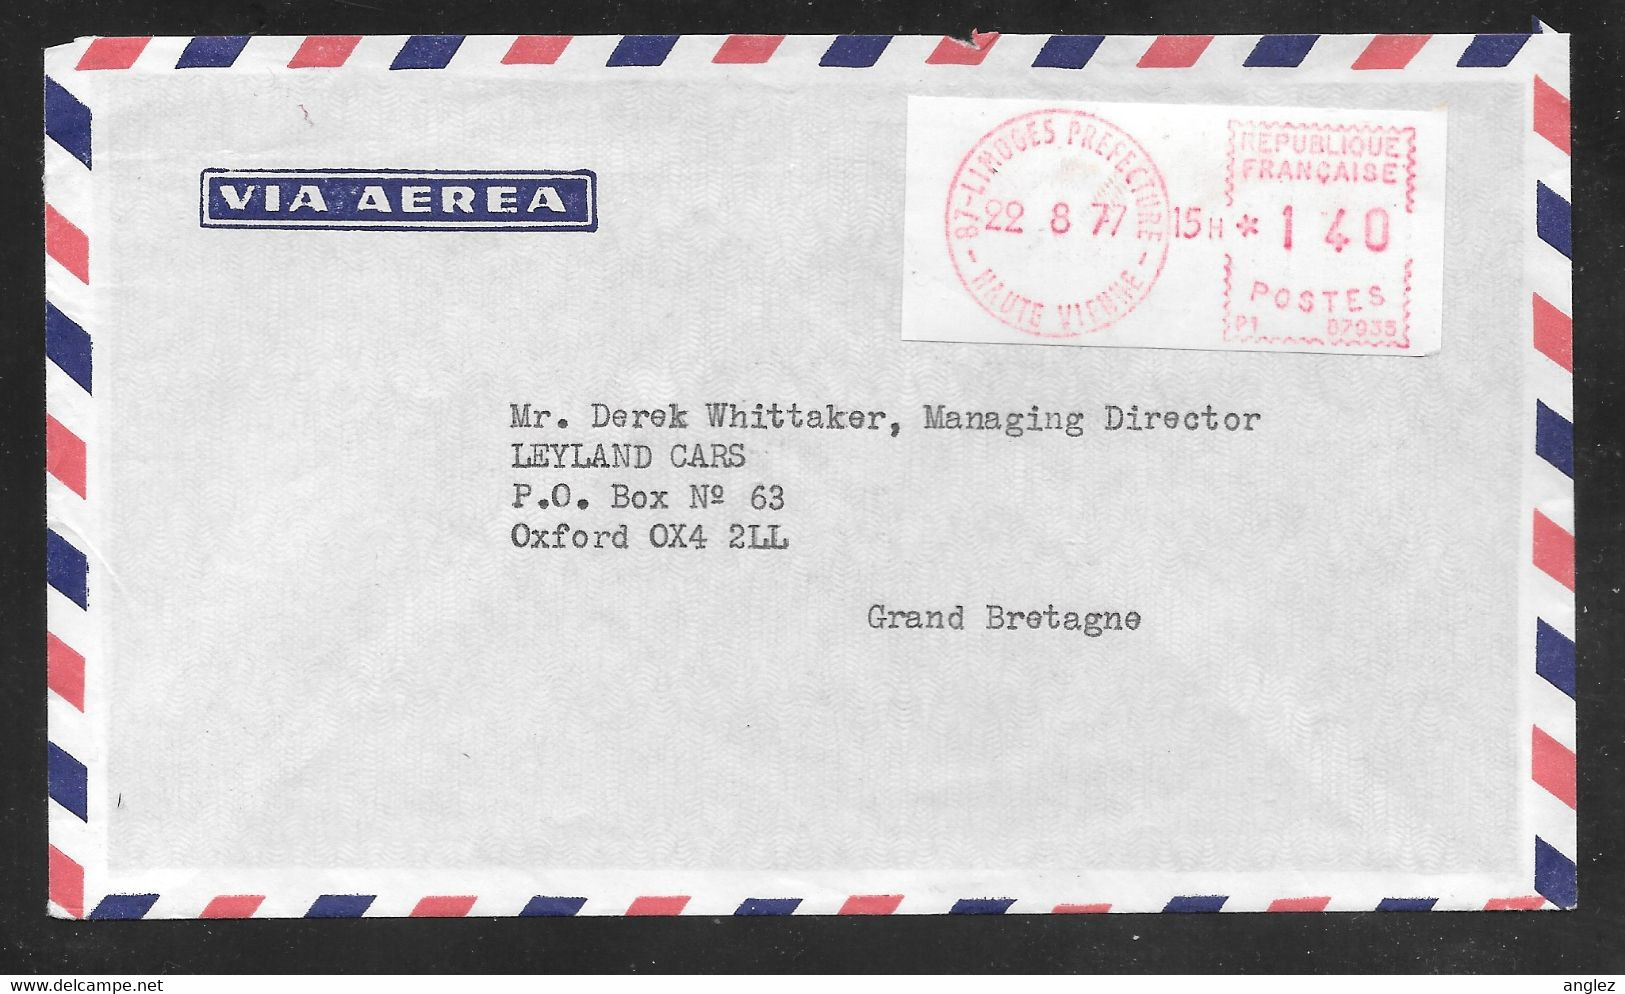 France - 1977 Airmail Cover - Limoges To England - Franking Label - 1969 Montgeron – White Paper – Frama/Satas